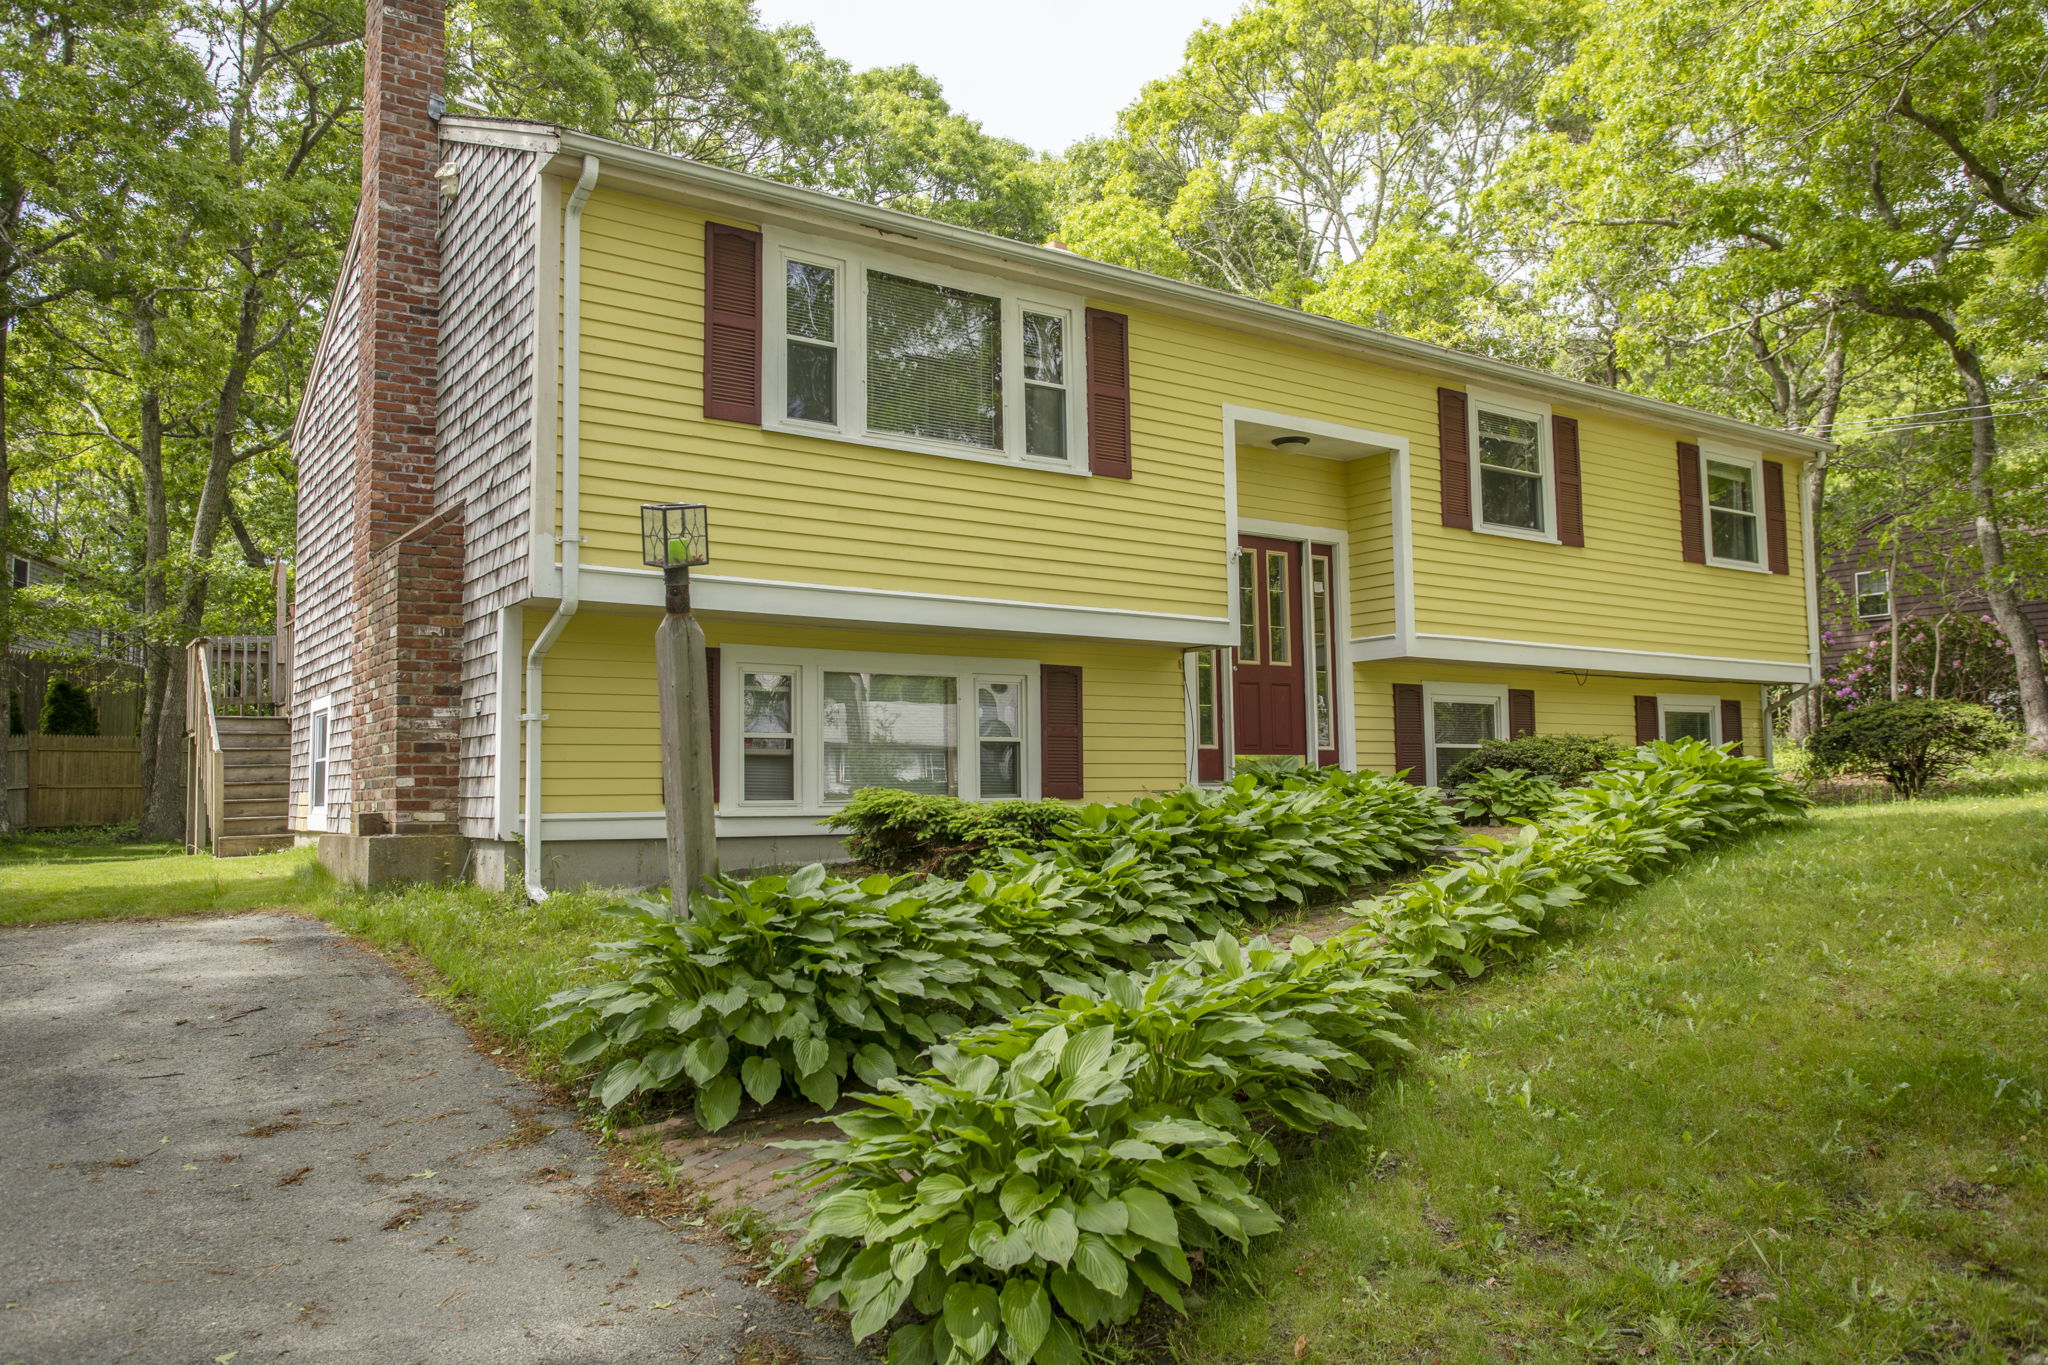  18 Spencer Dr, Plymouth, MA 02360, US